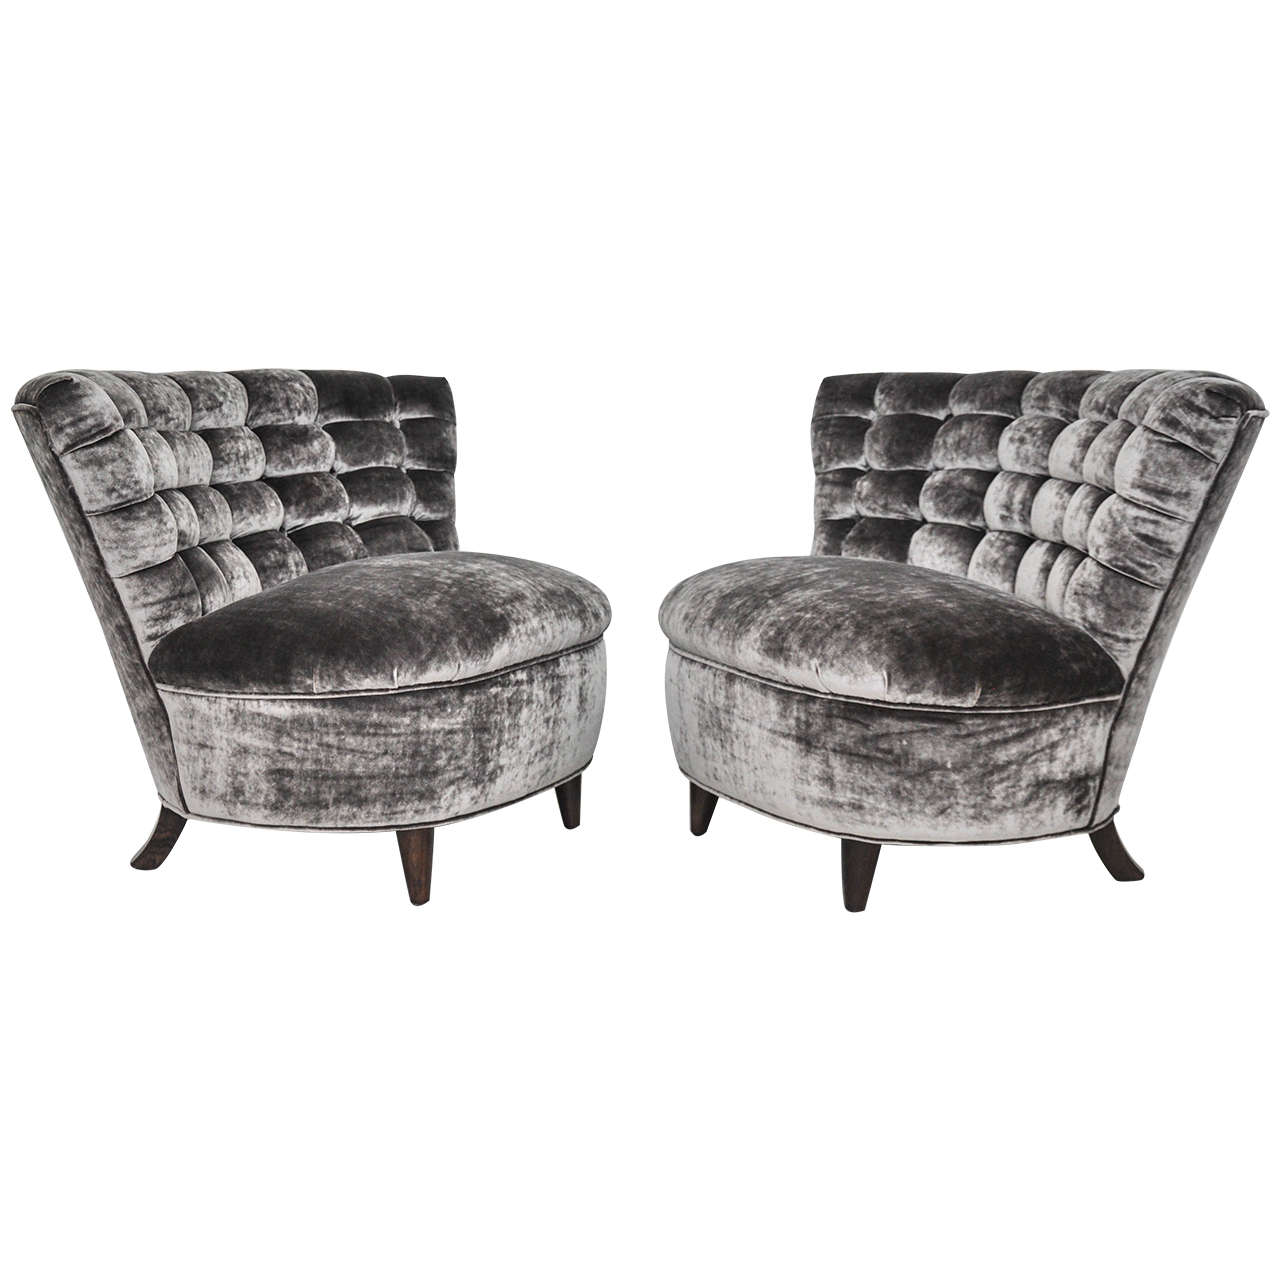 James Mont Tufted Slipper Chairs